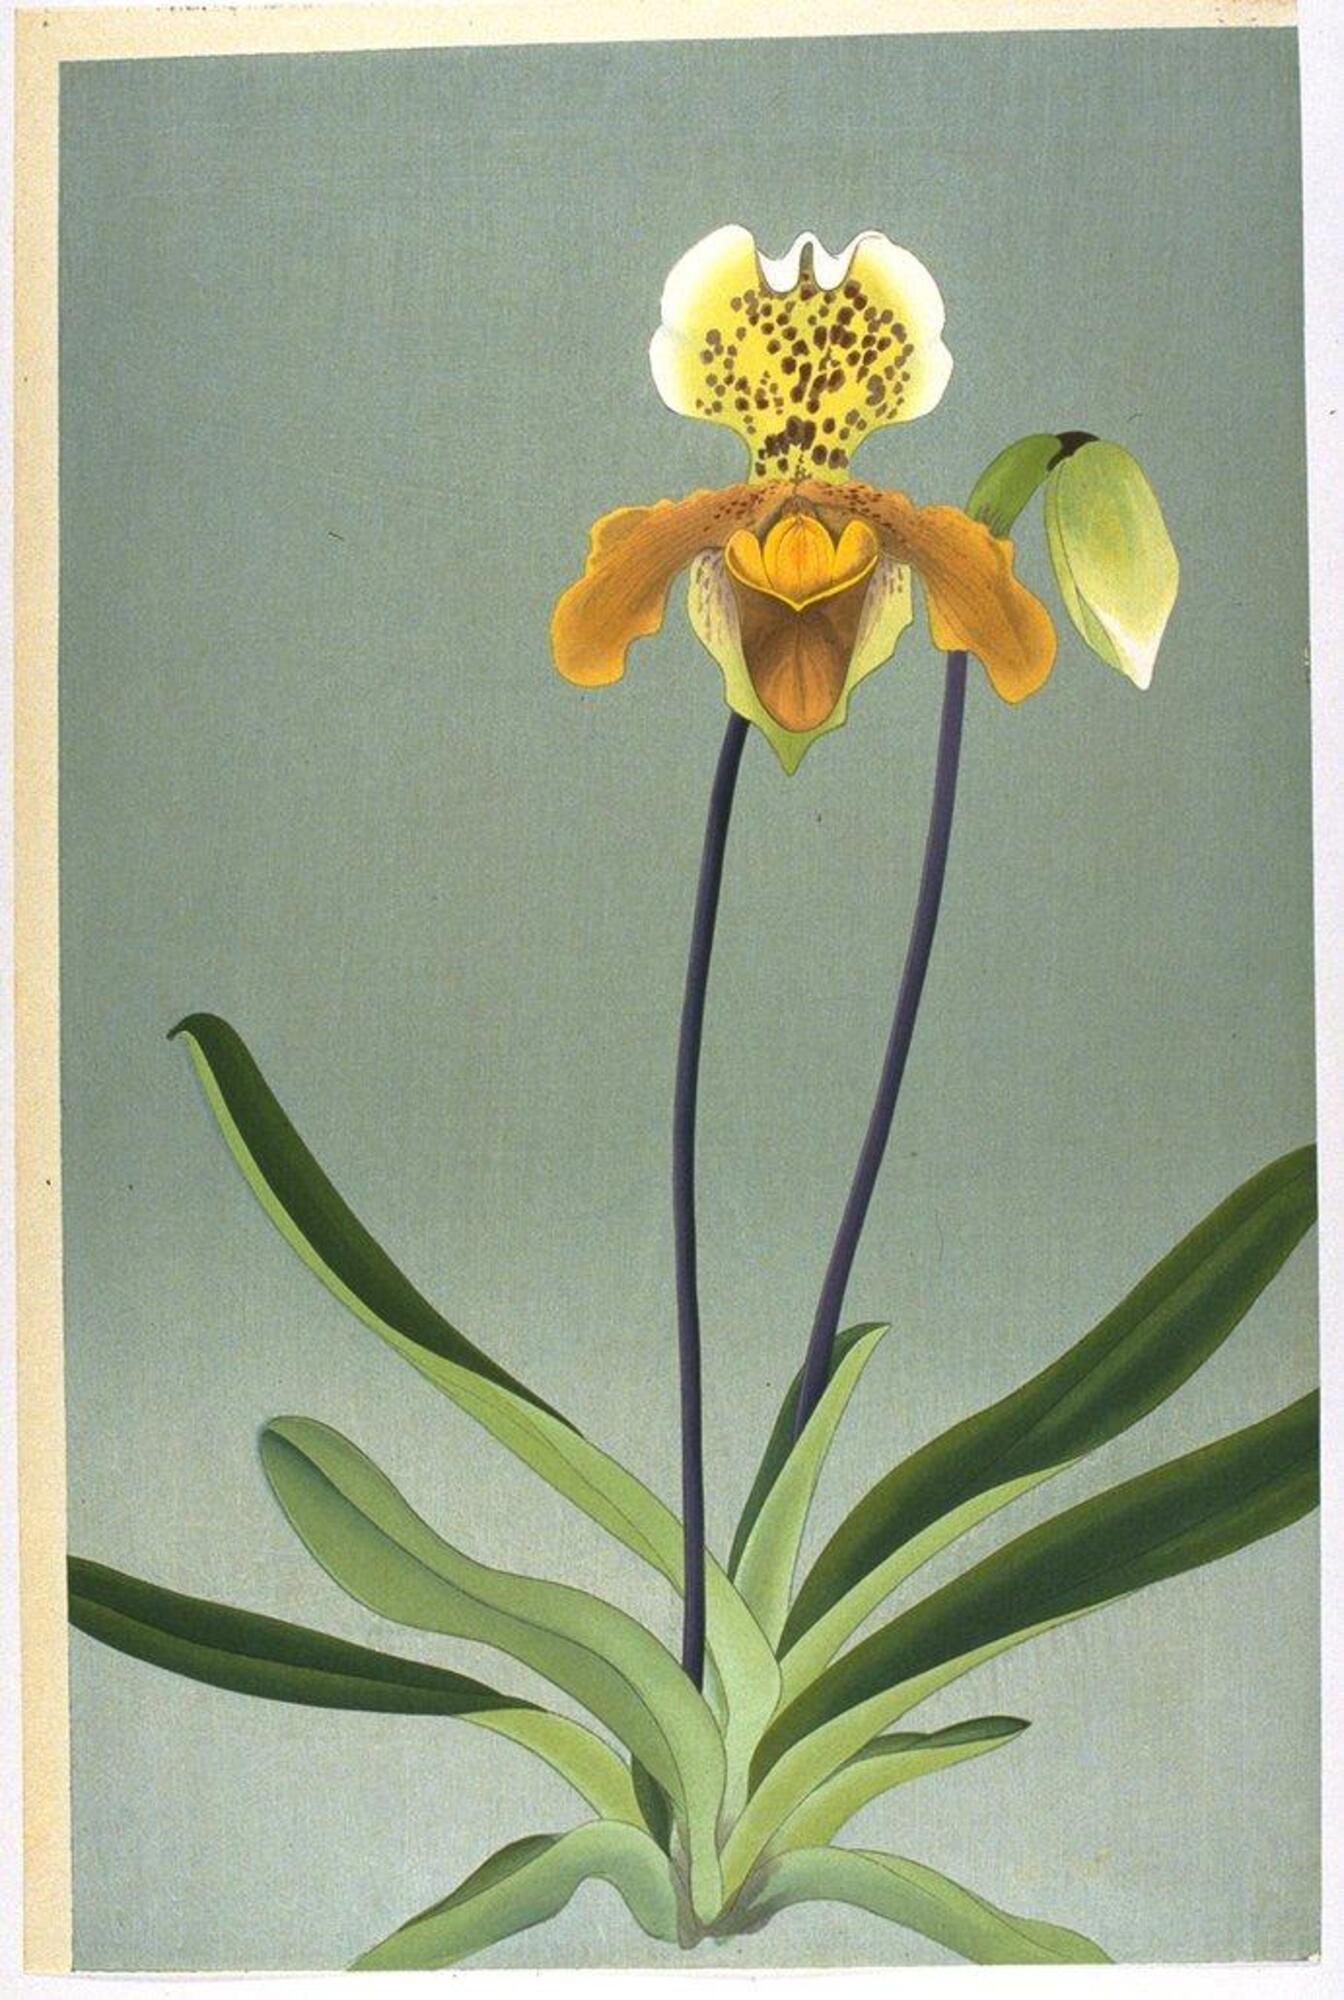 Yellow and white flower on a grey background. The bloom is in the upper right hand with a bud situated behind it. The base of the stem and the leaves are located on the bottom portion of the image.